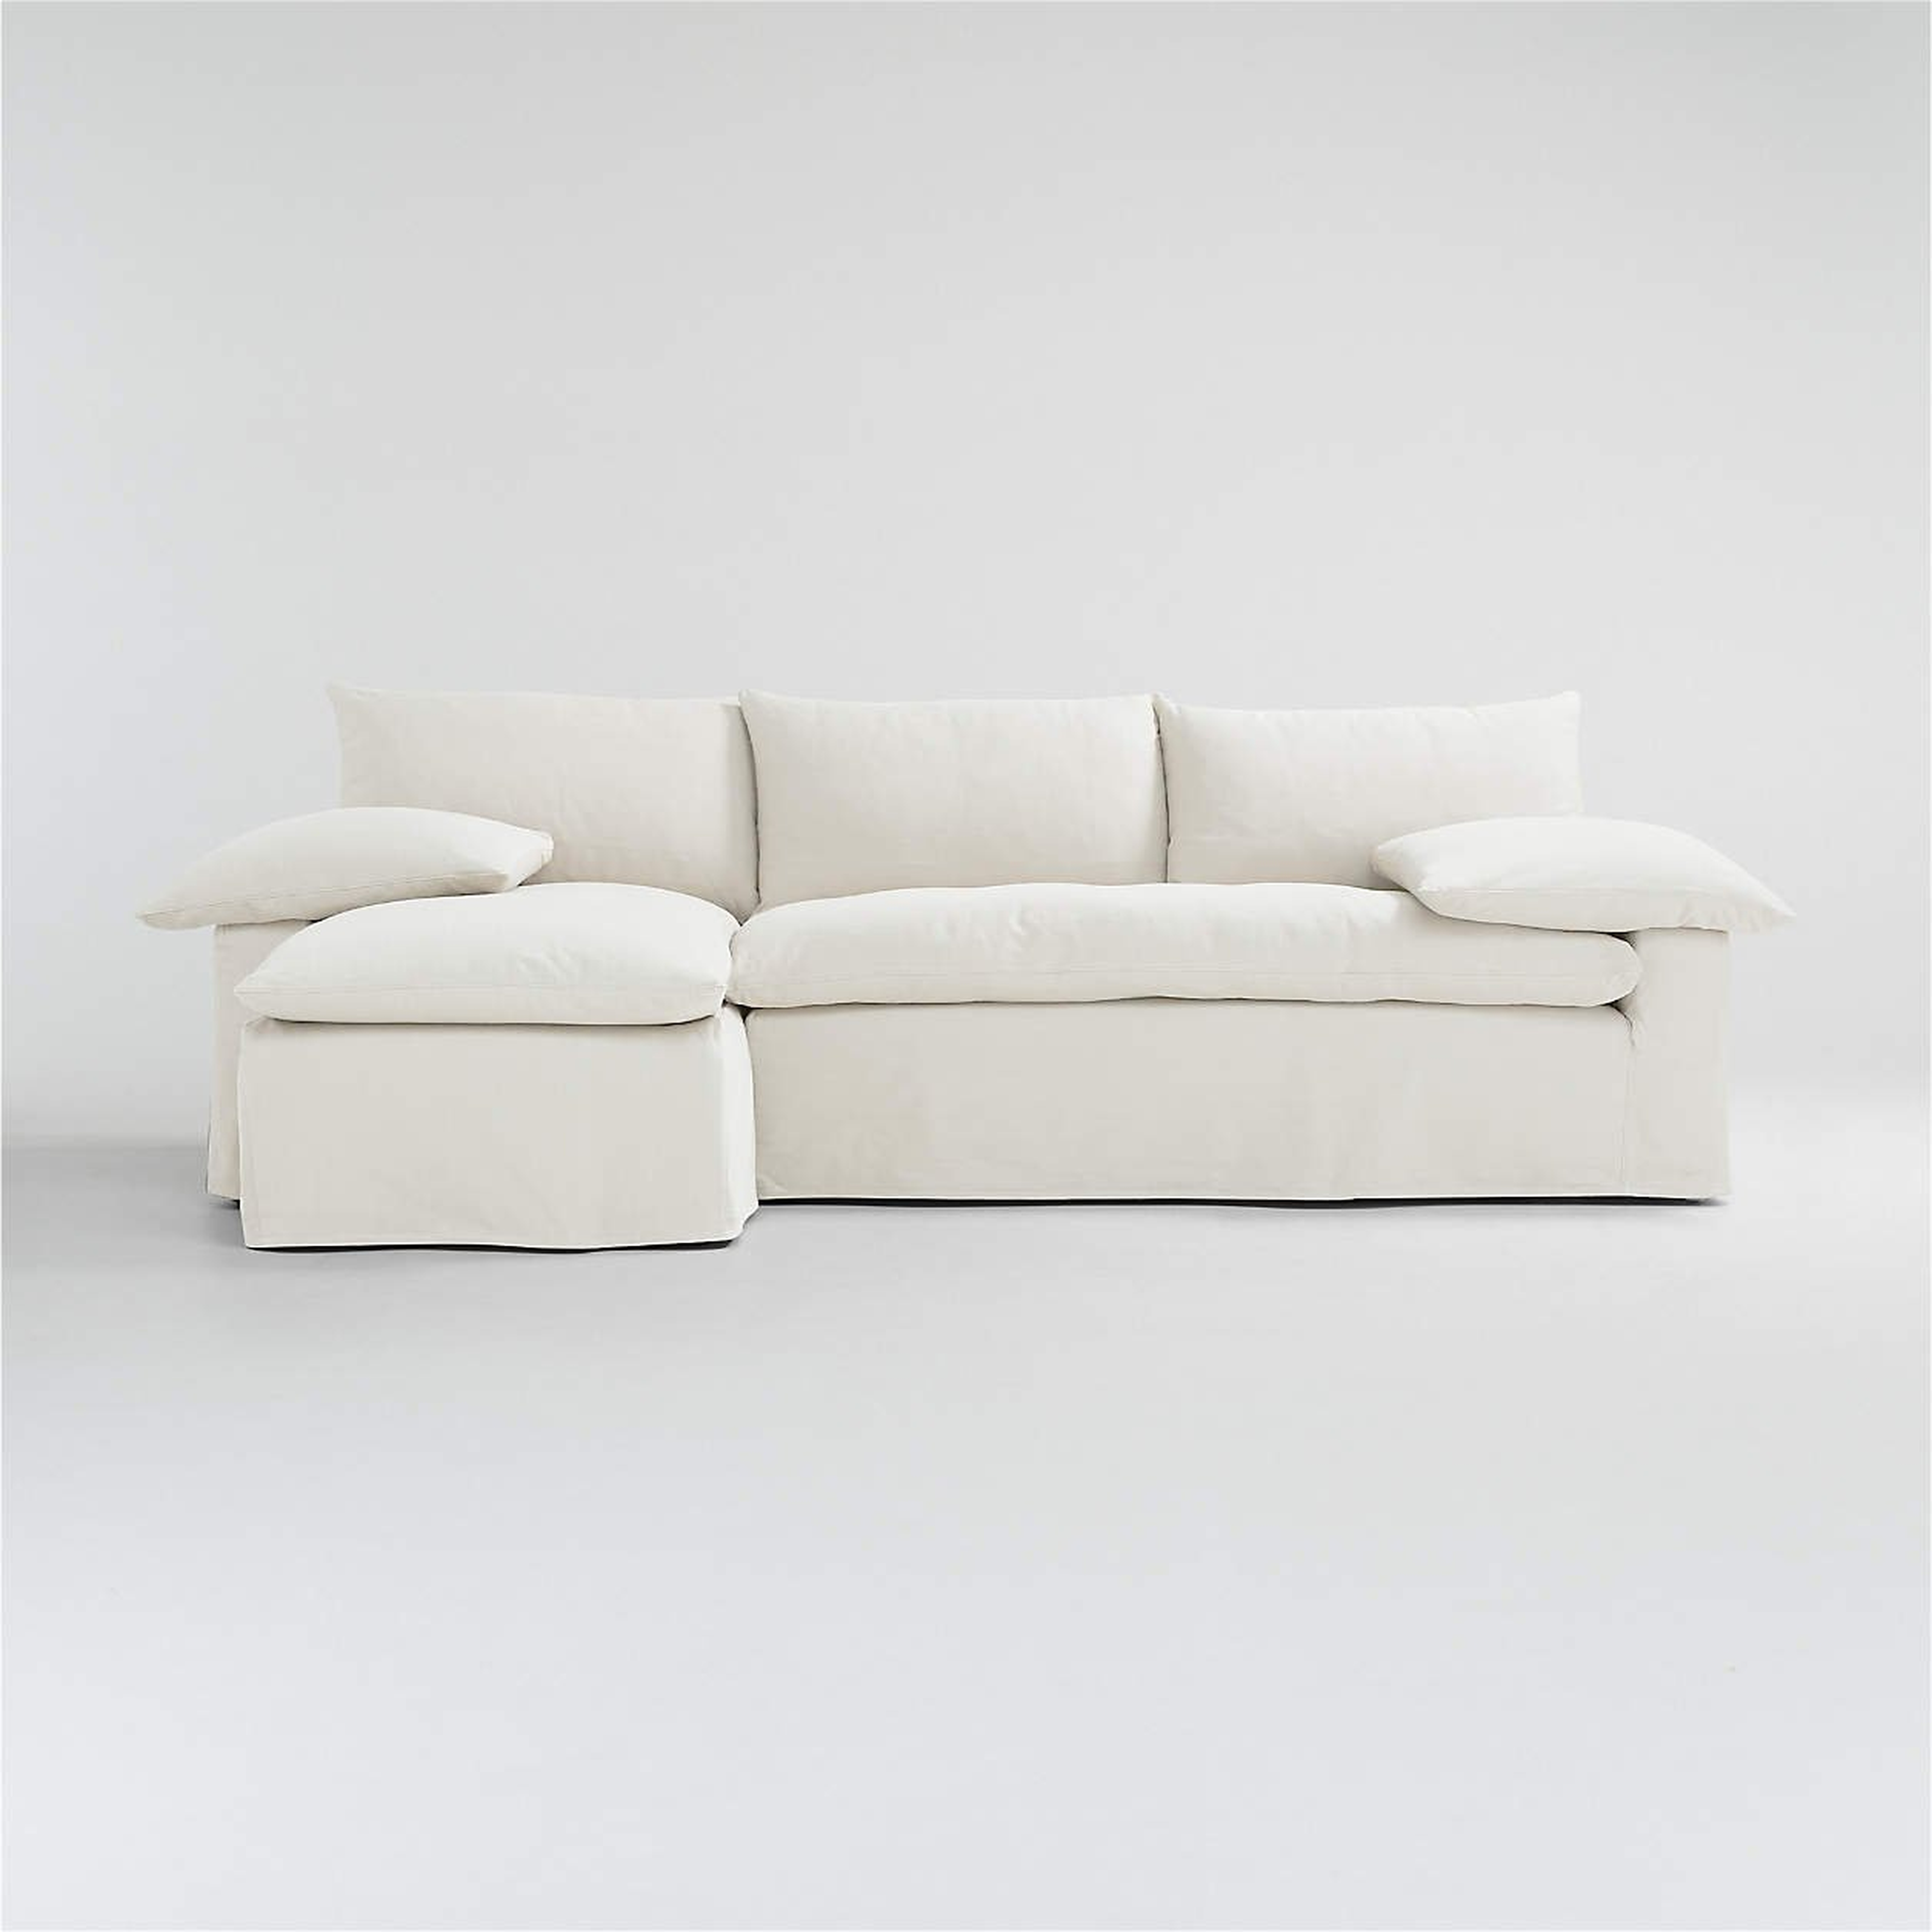 Ever Slipcovered 2-Piece Sectional Sofa with Left Arm Chaise by Leanne Ford - Crate and Barrel